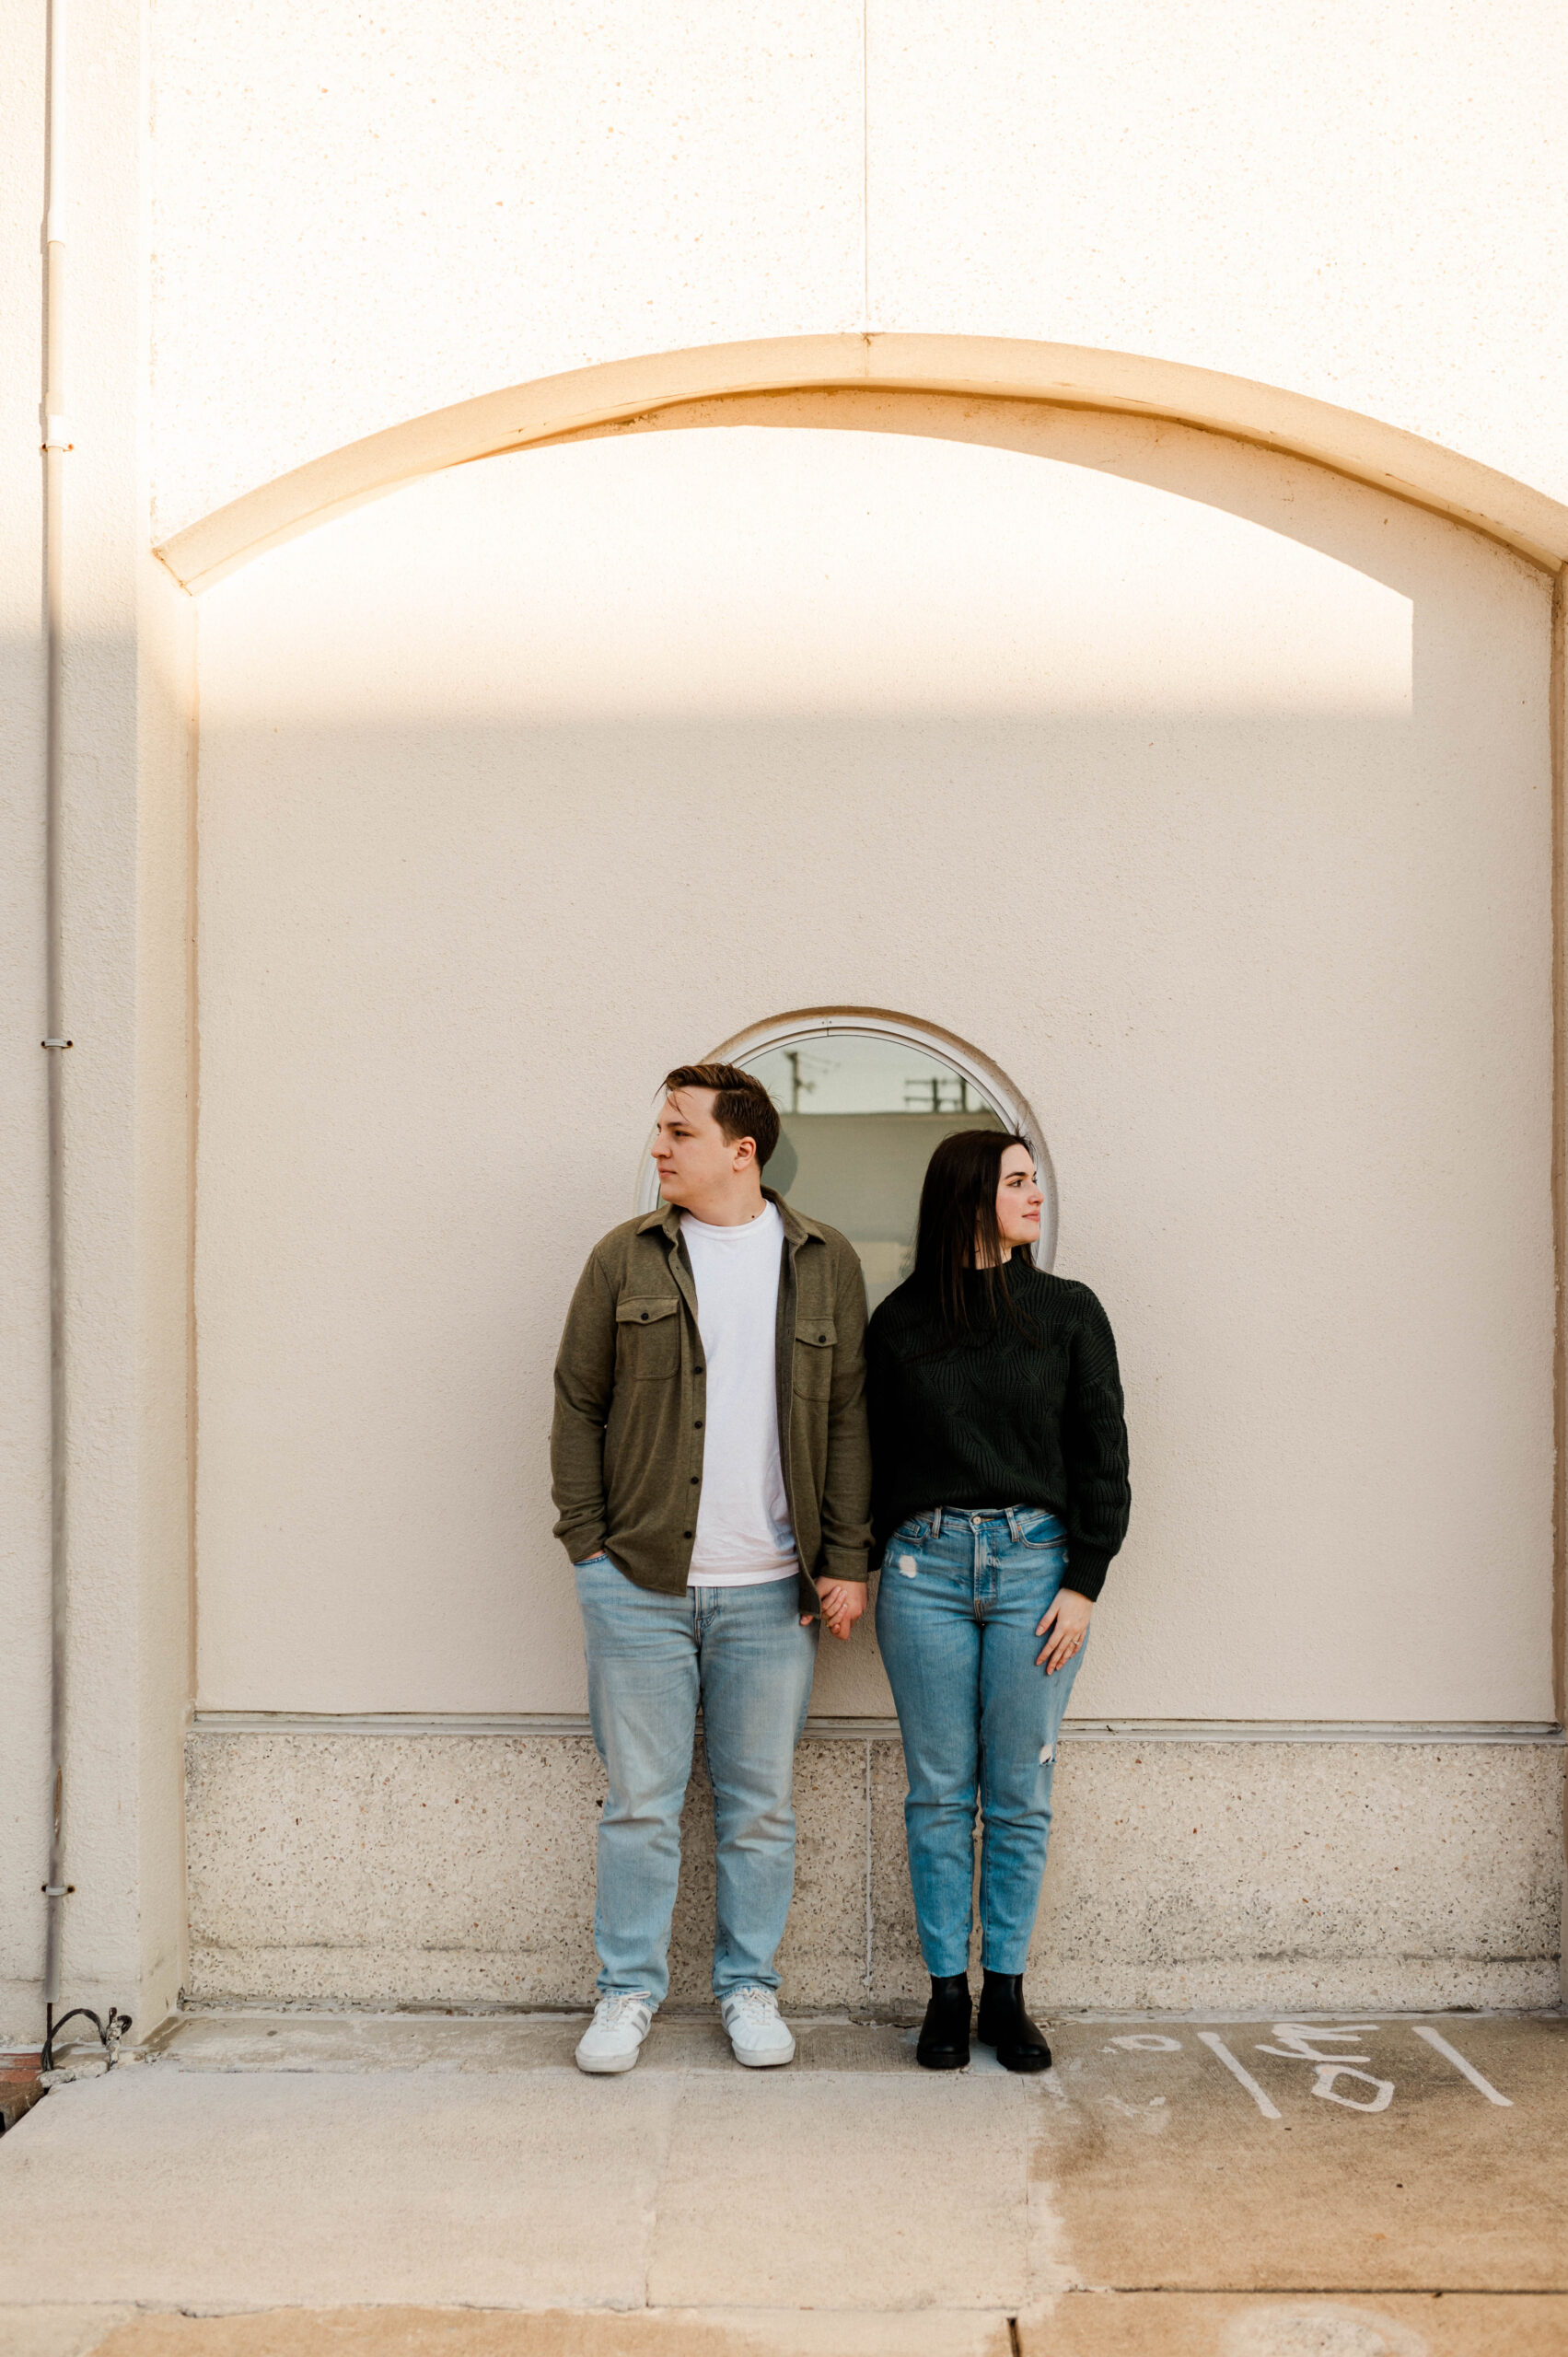 Teresa and Tyson's Engagement in Downtown Bryan, Texas with Rachel Driskell Photography